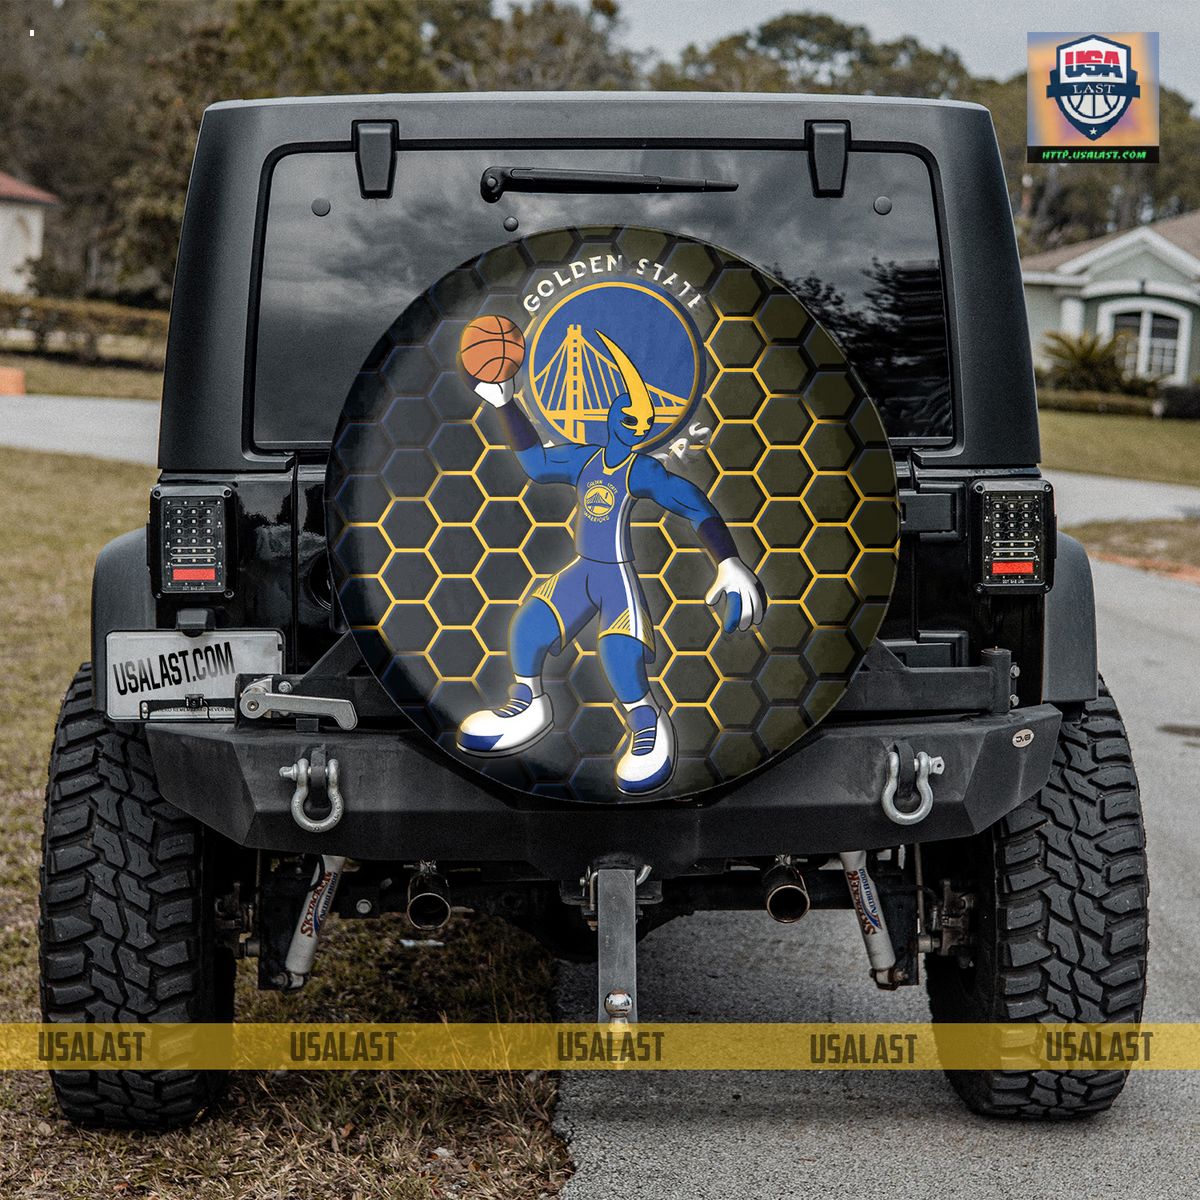 AMAZING Golden State Warriors NBA Mascot Spare Tire Cover